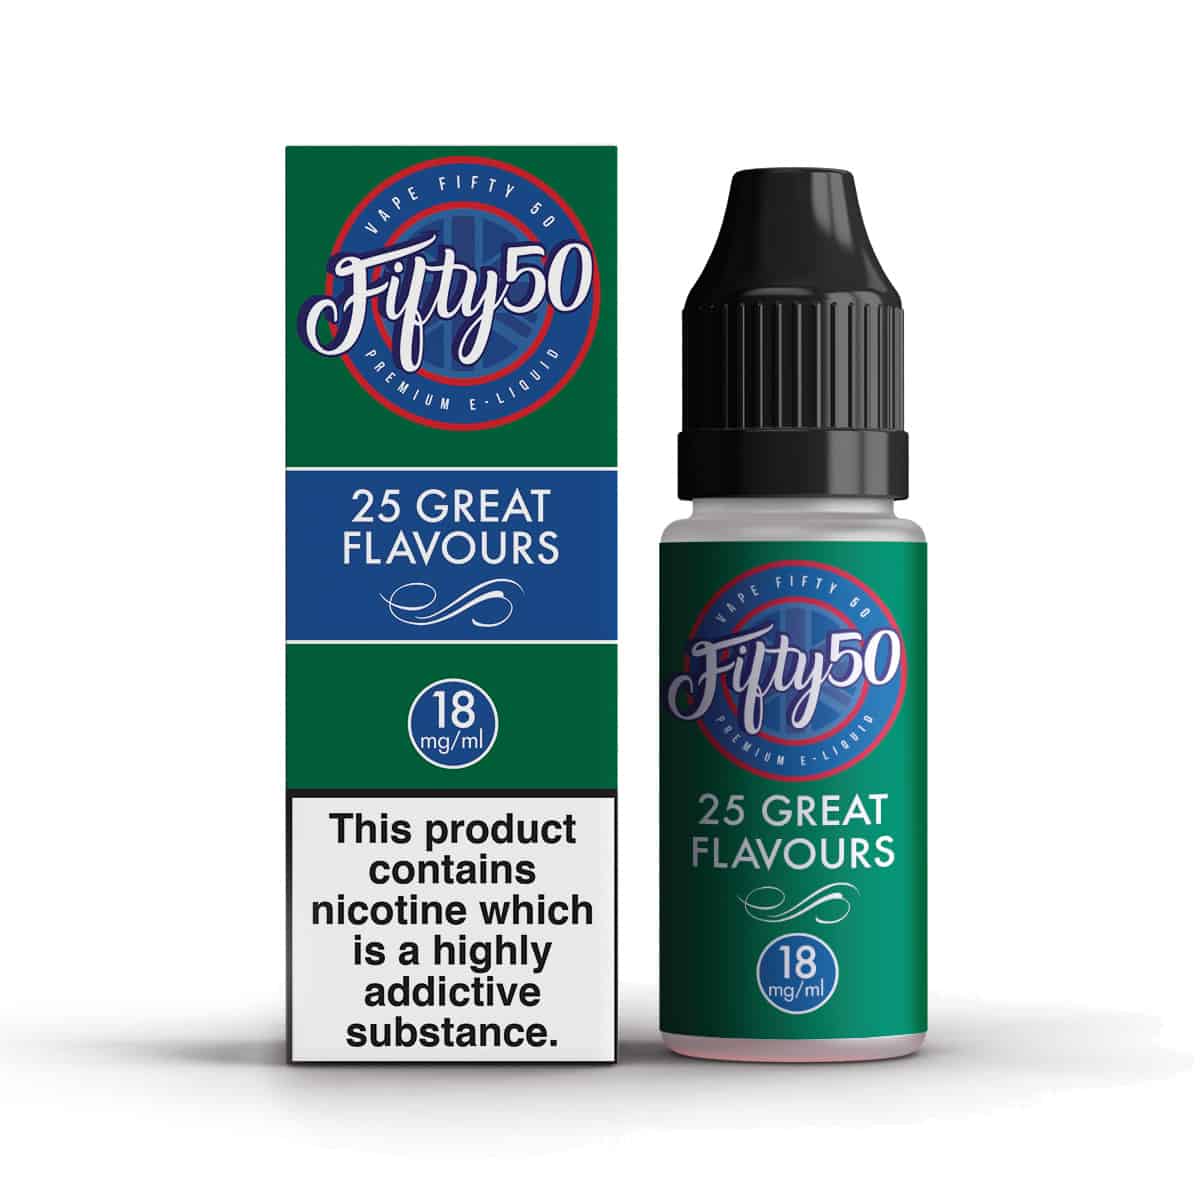 United kingdom UK First Eliquid Subscription Service Vape Made Simple offering Disposables, Freebase, Nic salts -  with a wide variety of disposables Lost Mary Crystal Bar Elf Disposables - 50 Fifty Strawberry Cheesecake 18mg